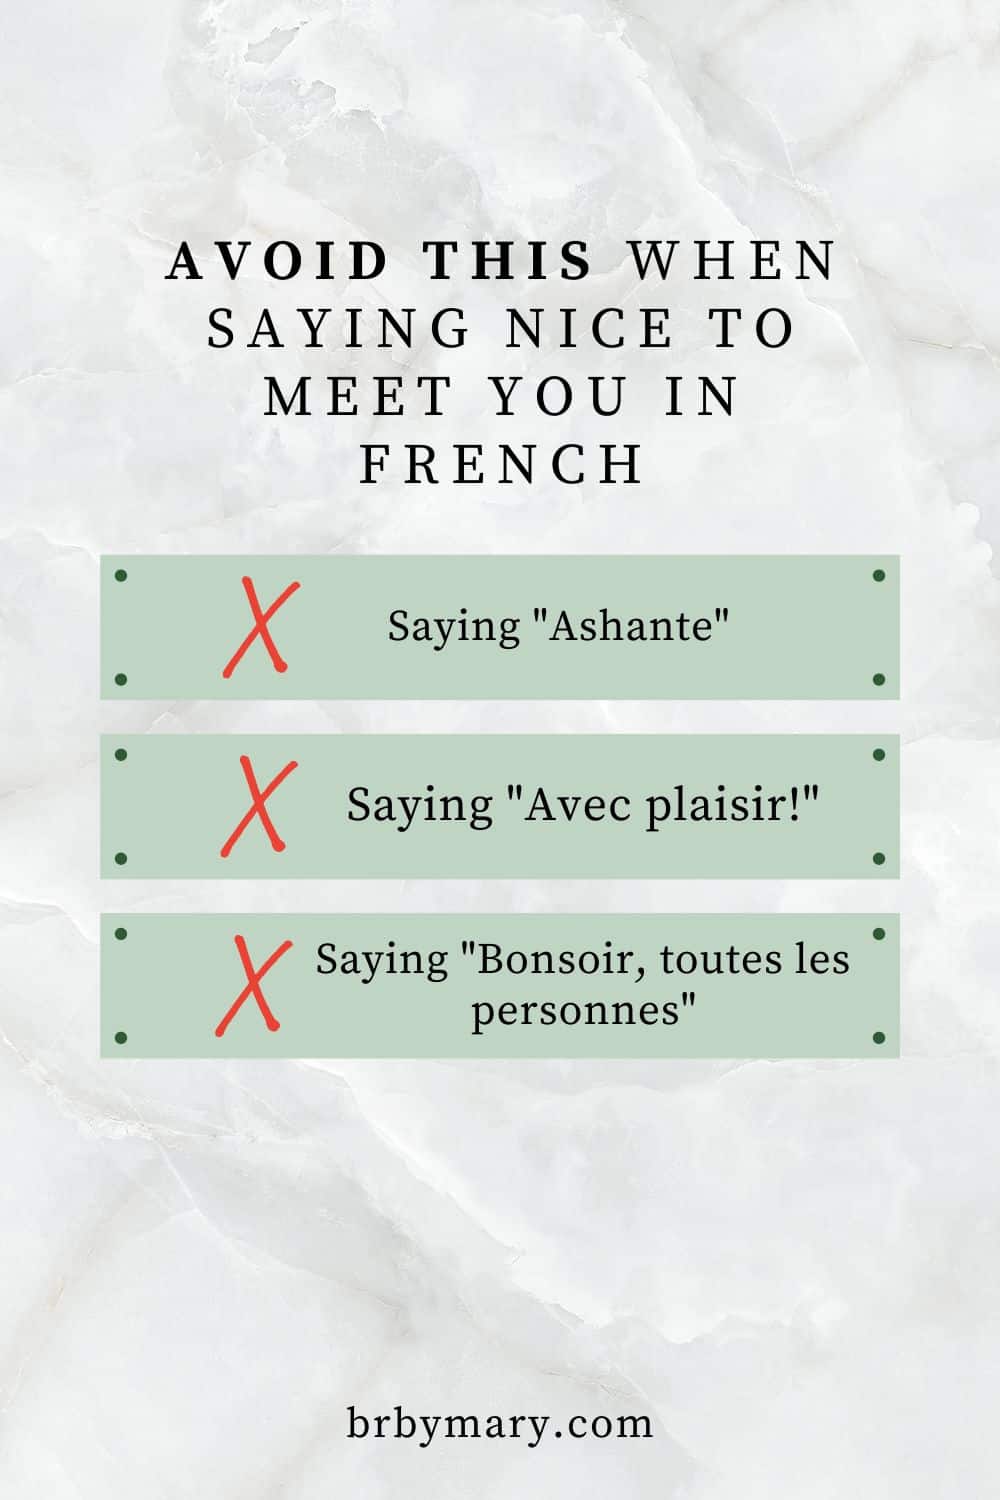 55 Ways to Say Nice to meet you in French: All You Need to Know to ...